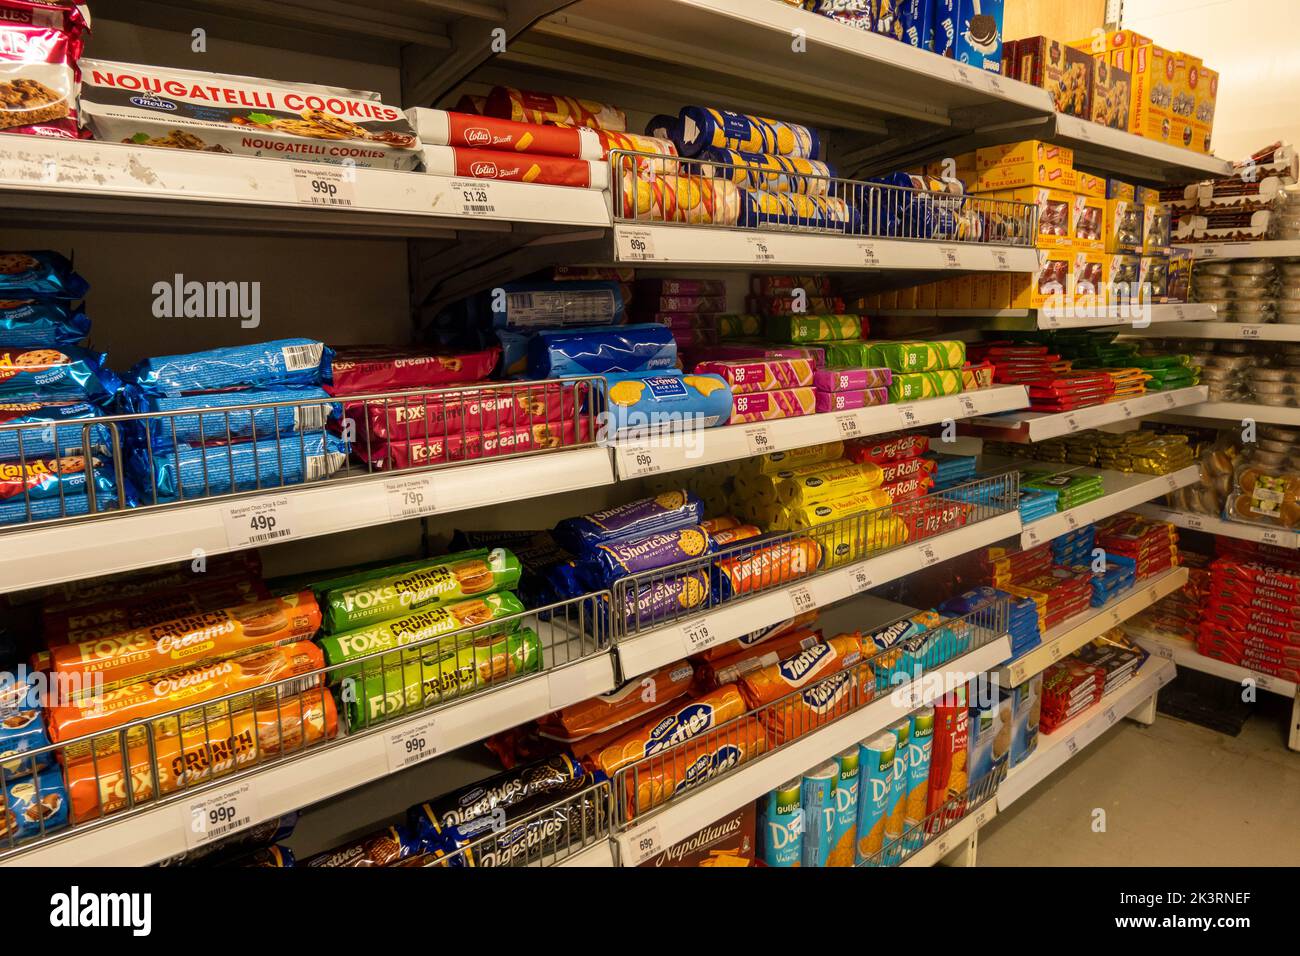 Biscuits on shelves in a British supermarket Stock Photo